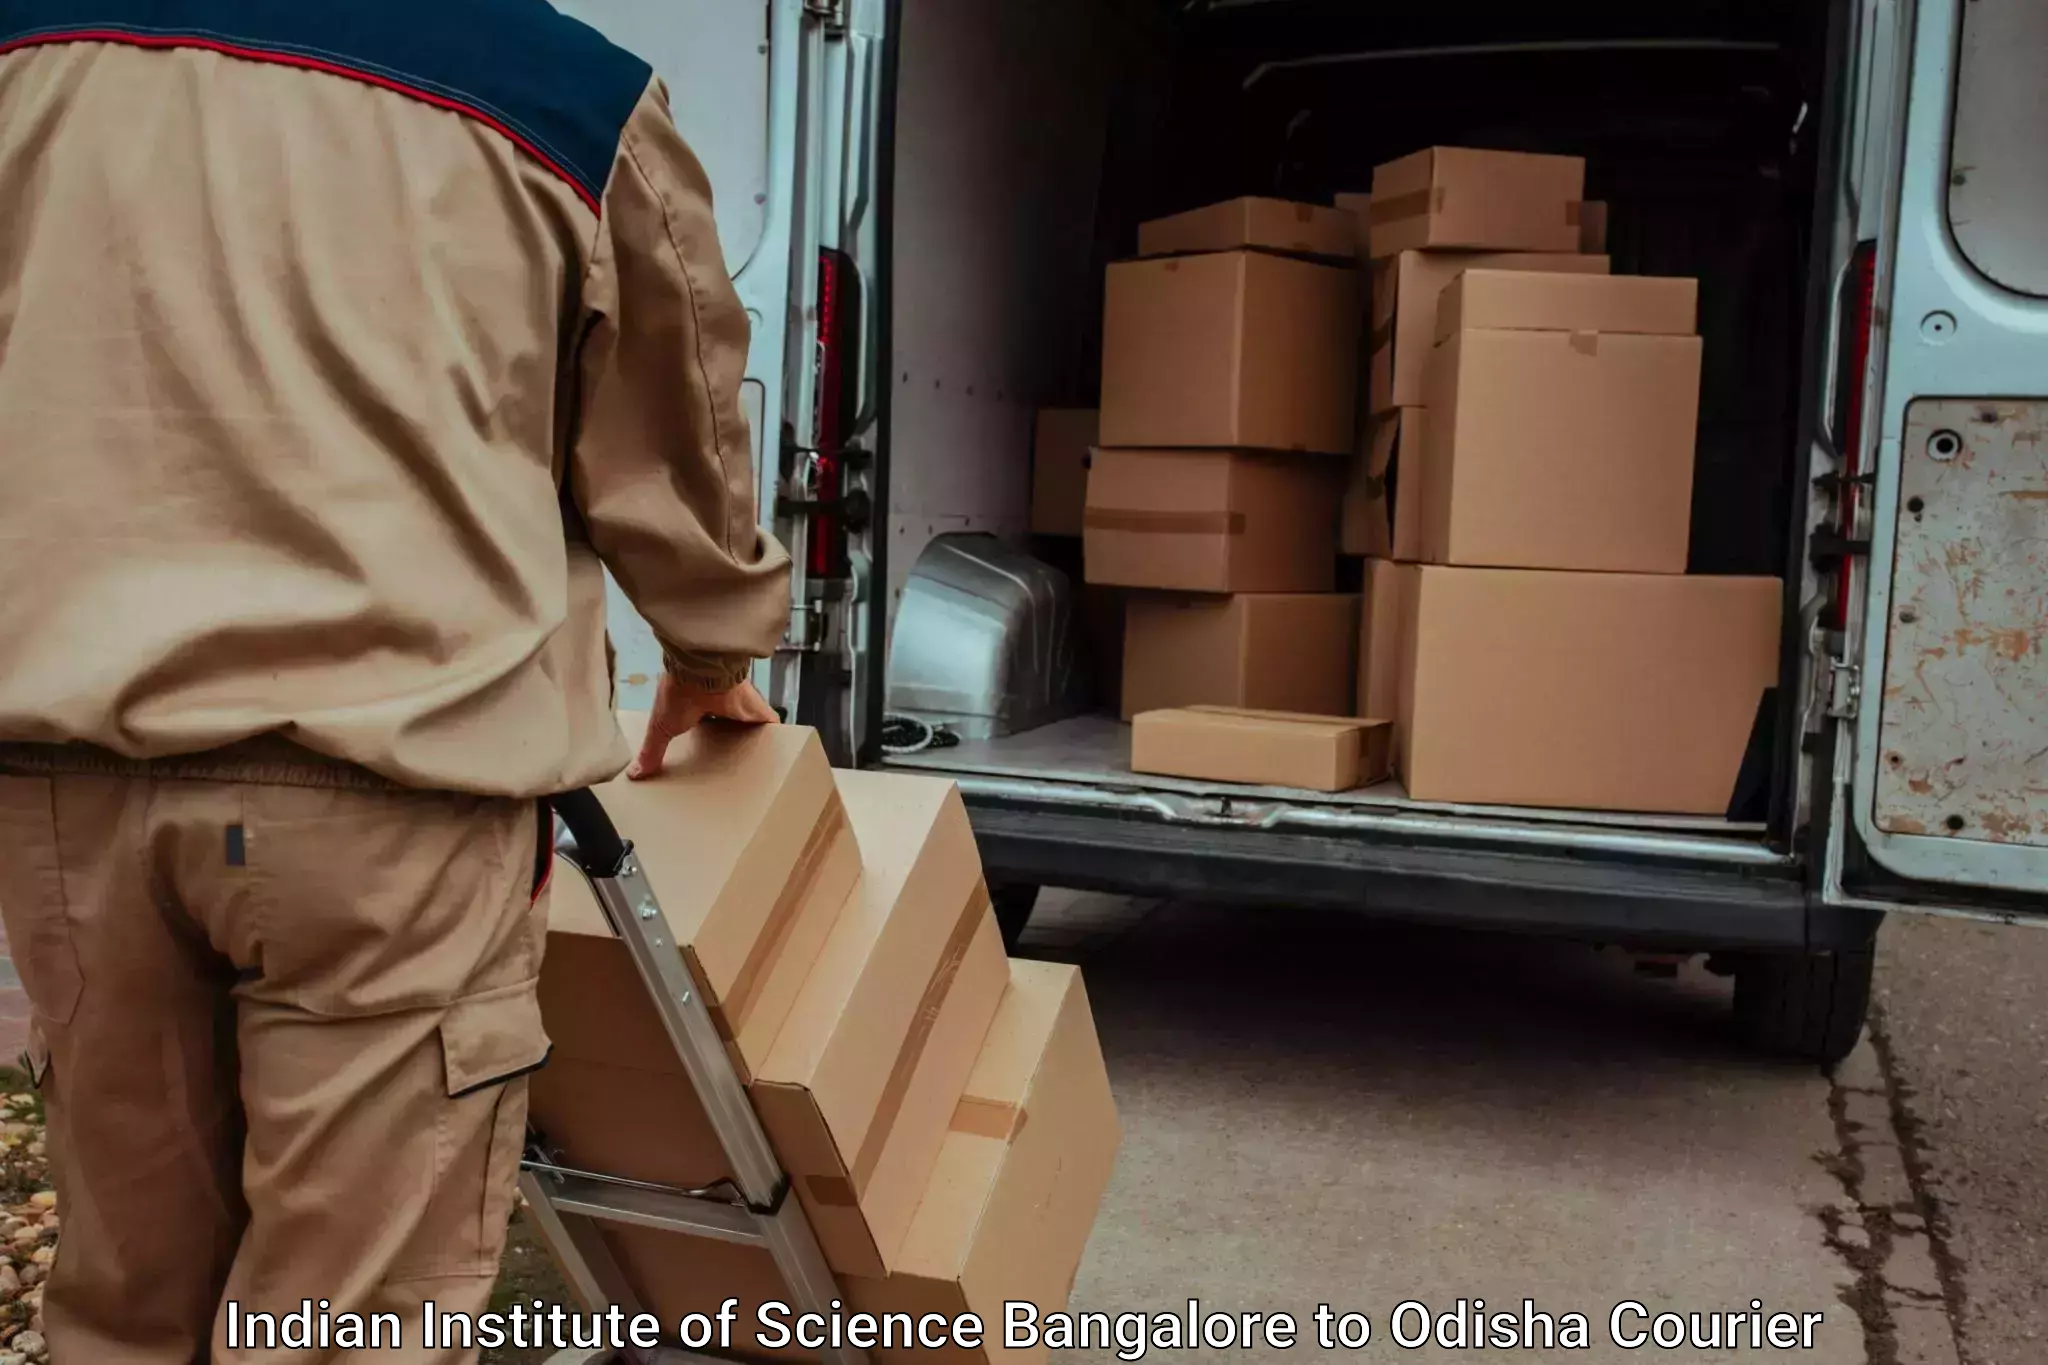 Furniture transport solutions Indian Institute of Science Bangalore to Birmaharajpur